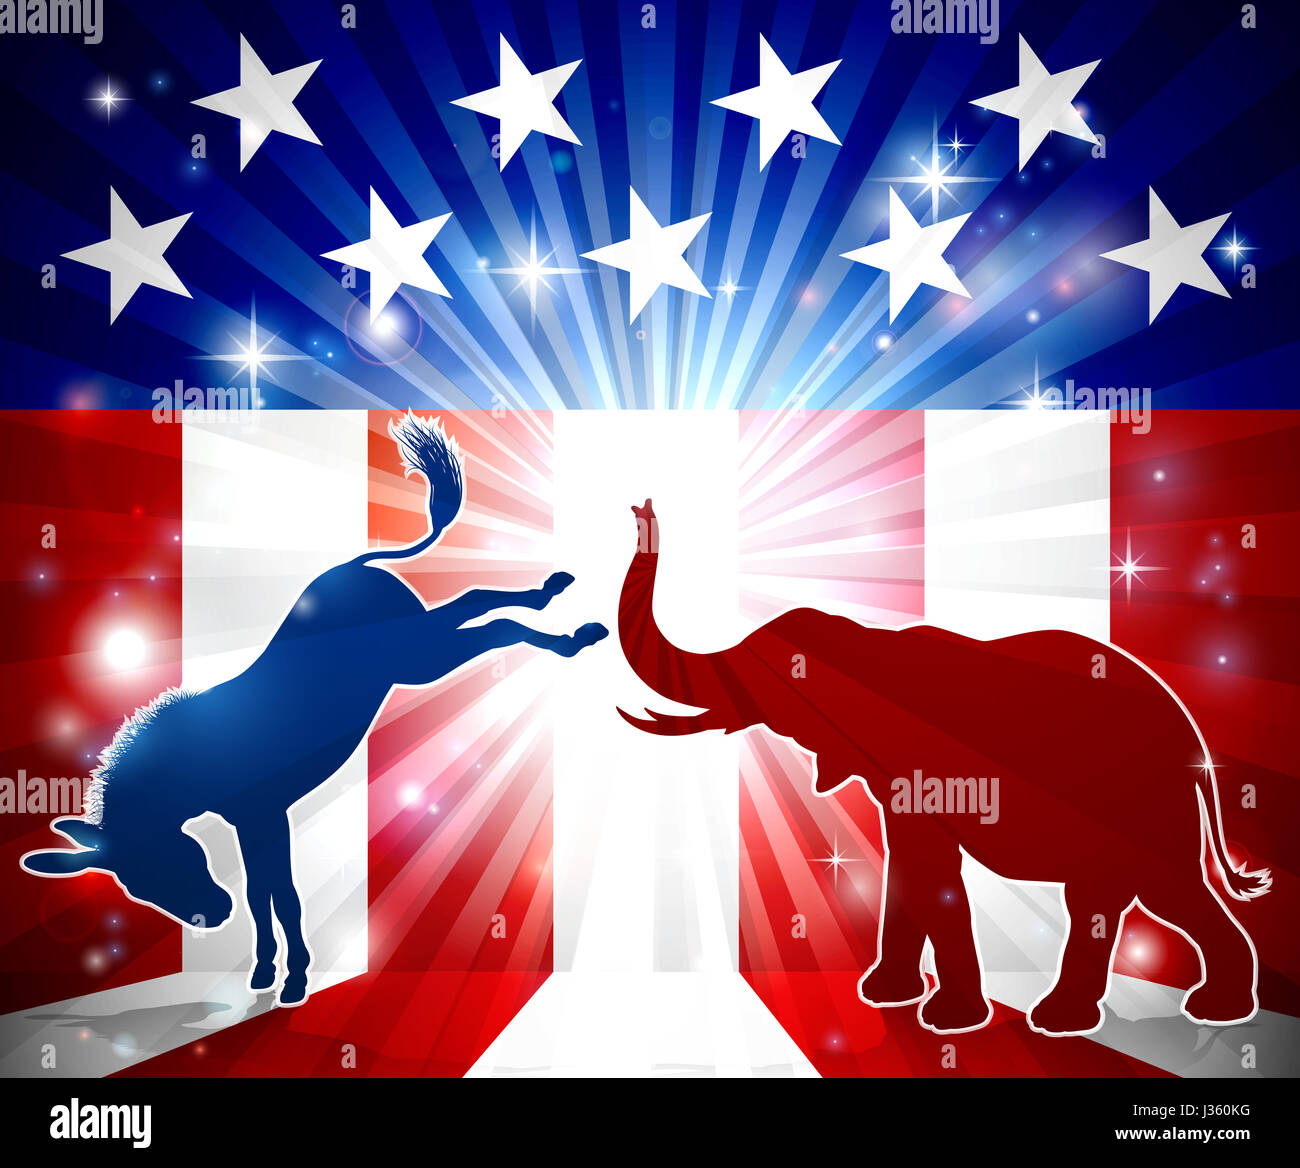 A silhouette donkey and an elephant with an American flag in the background democrat and republican political mascot animals Stock Photo